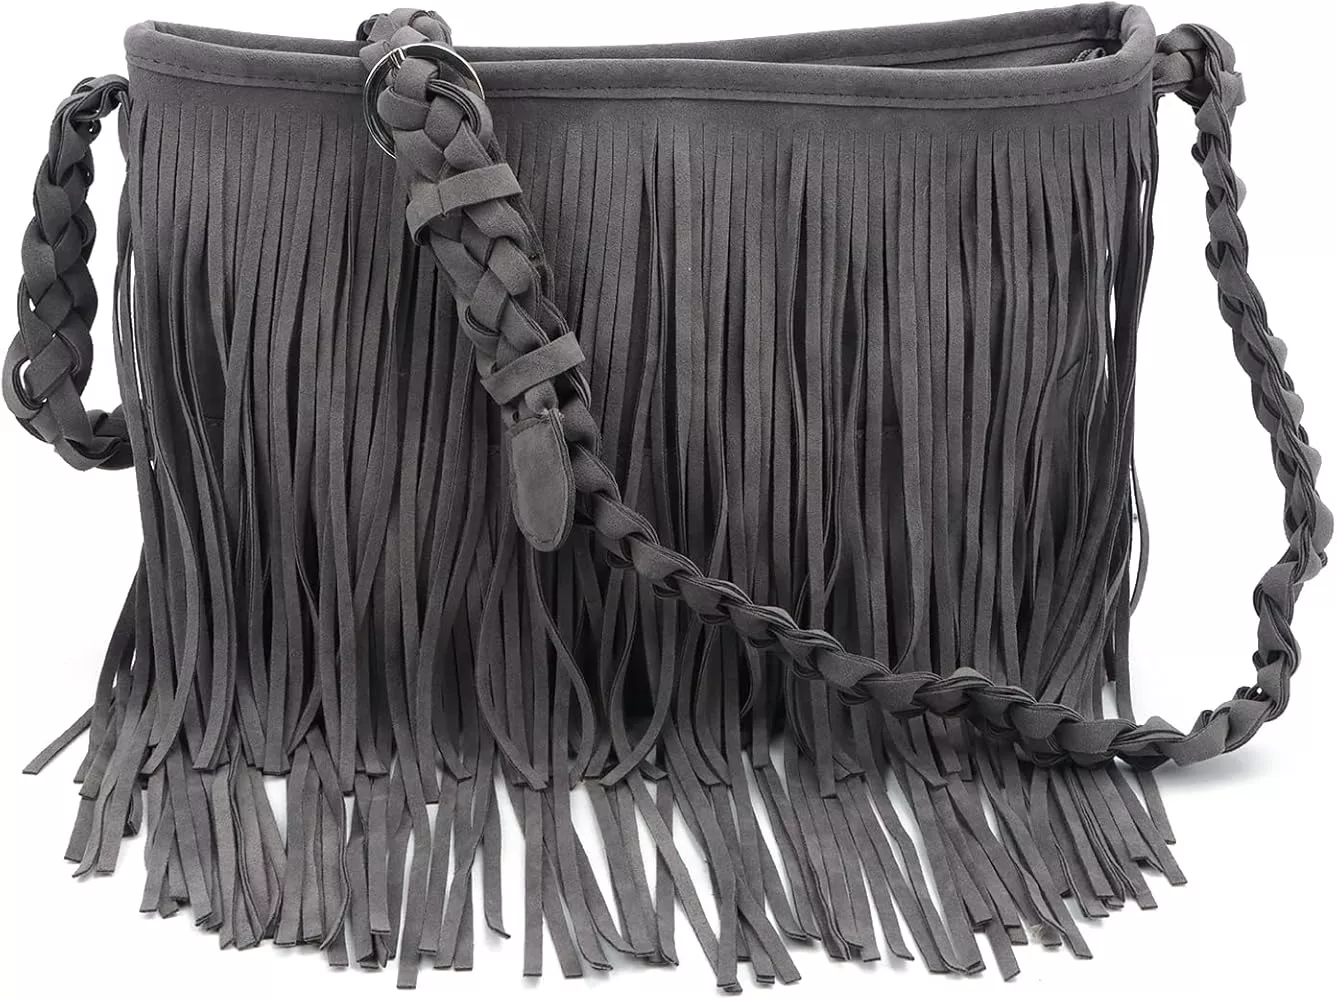  Women's Faux Suede Fringe Crossbody Purse Tassel Shoulder Bag  Hippie Boho Western Purse Nashville Country Concert Outfits (Brown,One  Size) : Clothing, Shoes & Jewelry